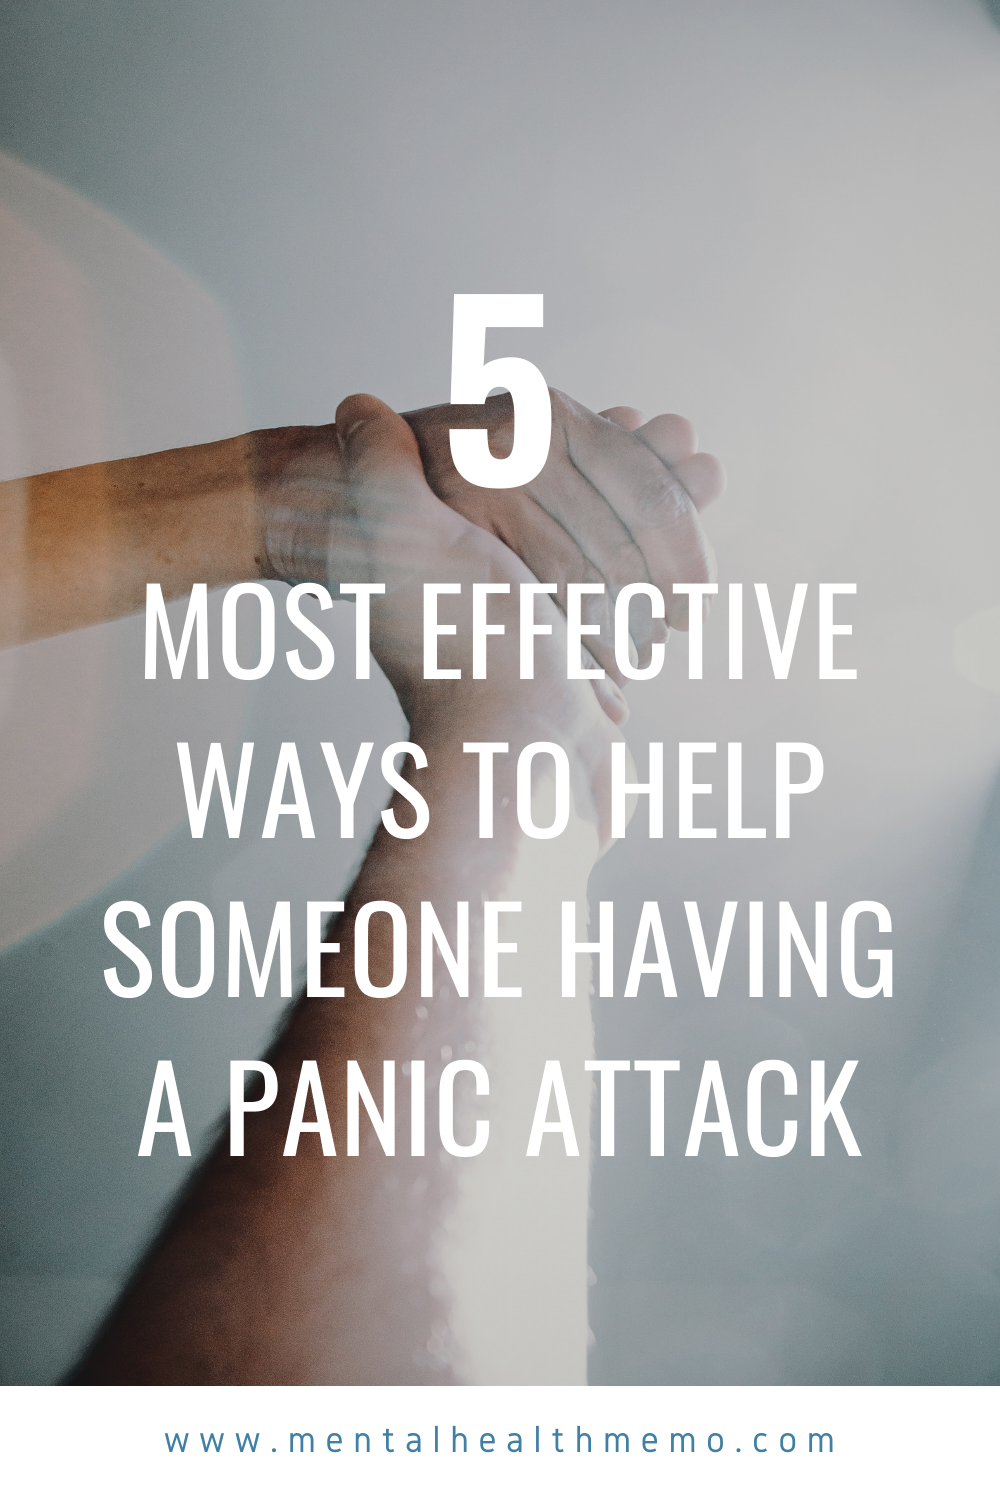 Pin: 5 most effective ways to help someone having a panic attack